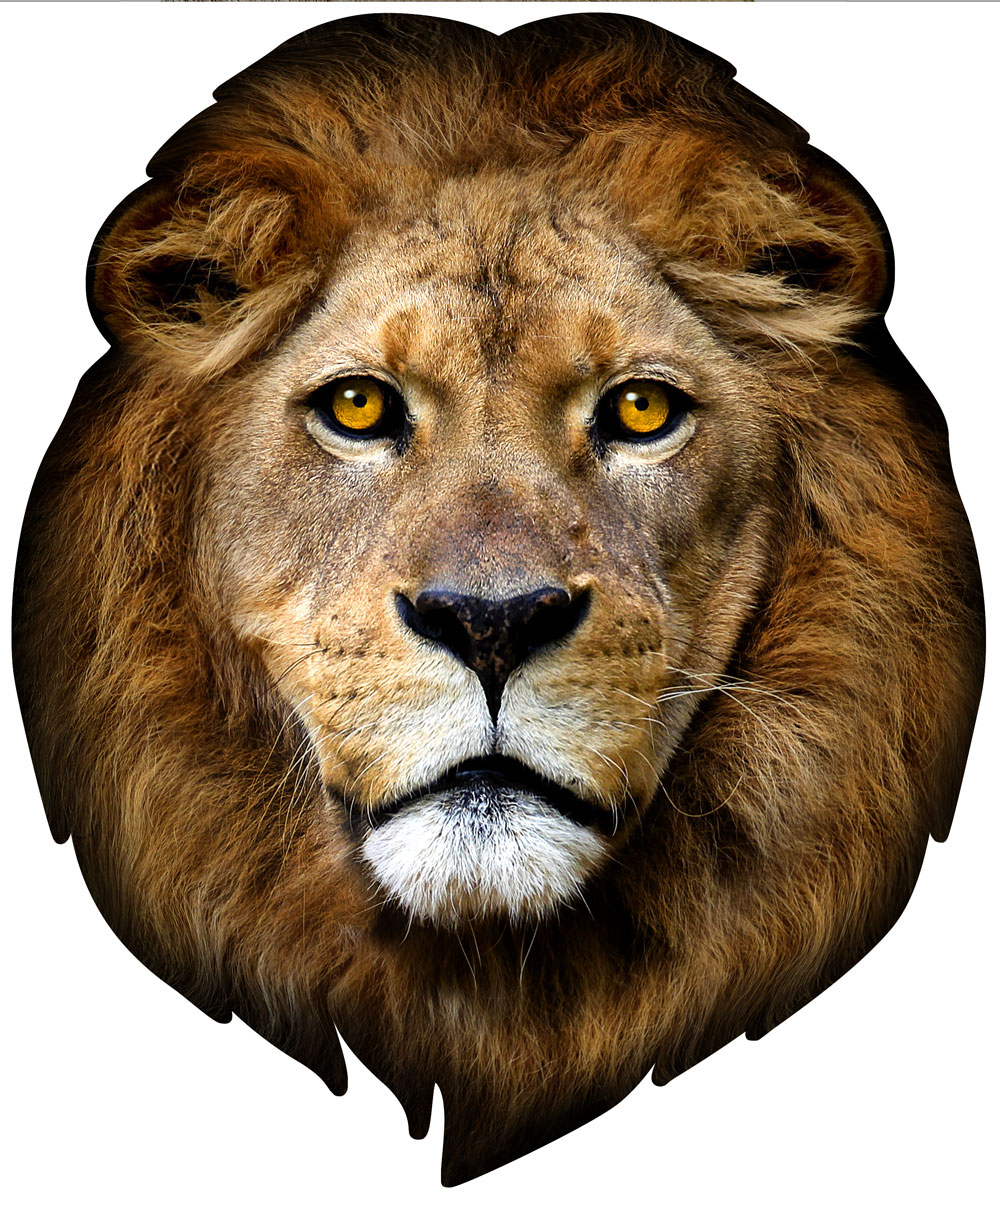 photo retouching of an image a lion that was used for a puzzle before and after